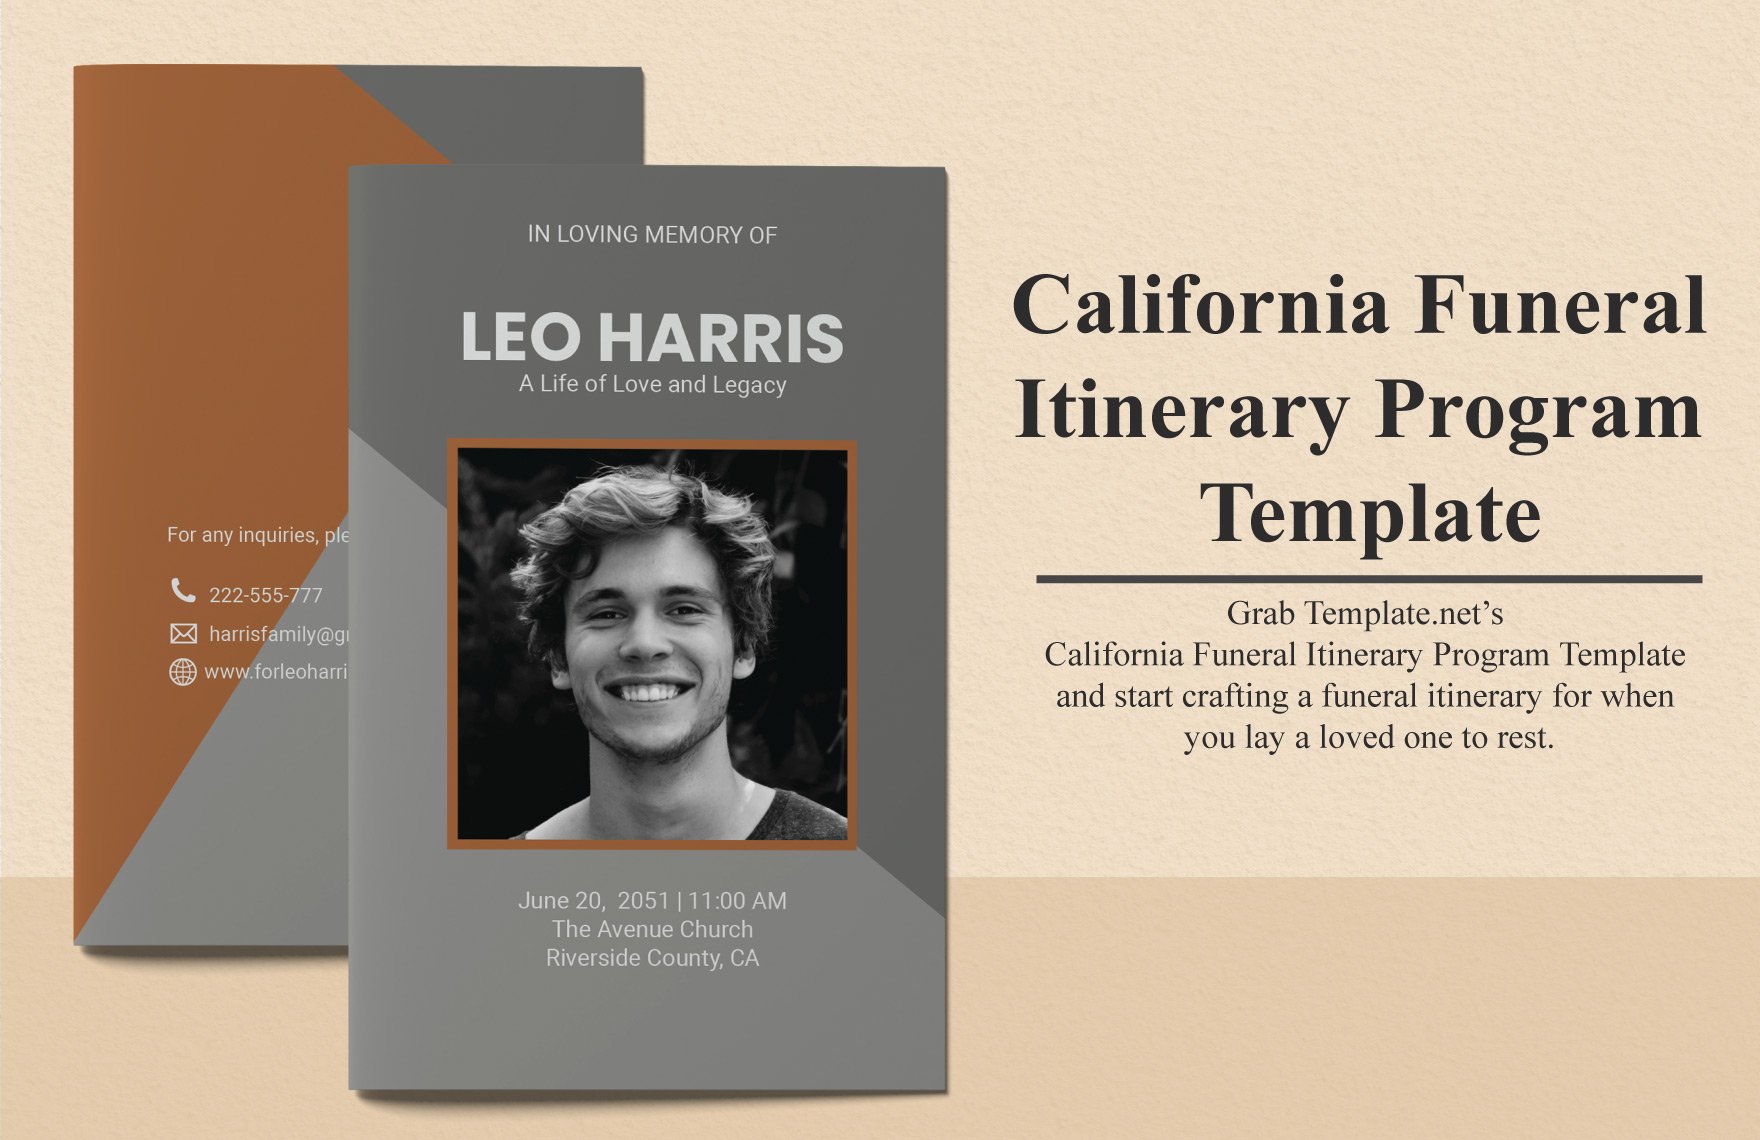 California Funeral Itinerary Program Template in Word, Illustrator, PSD